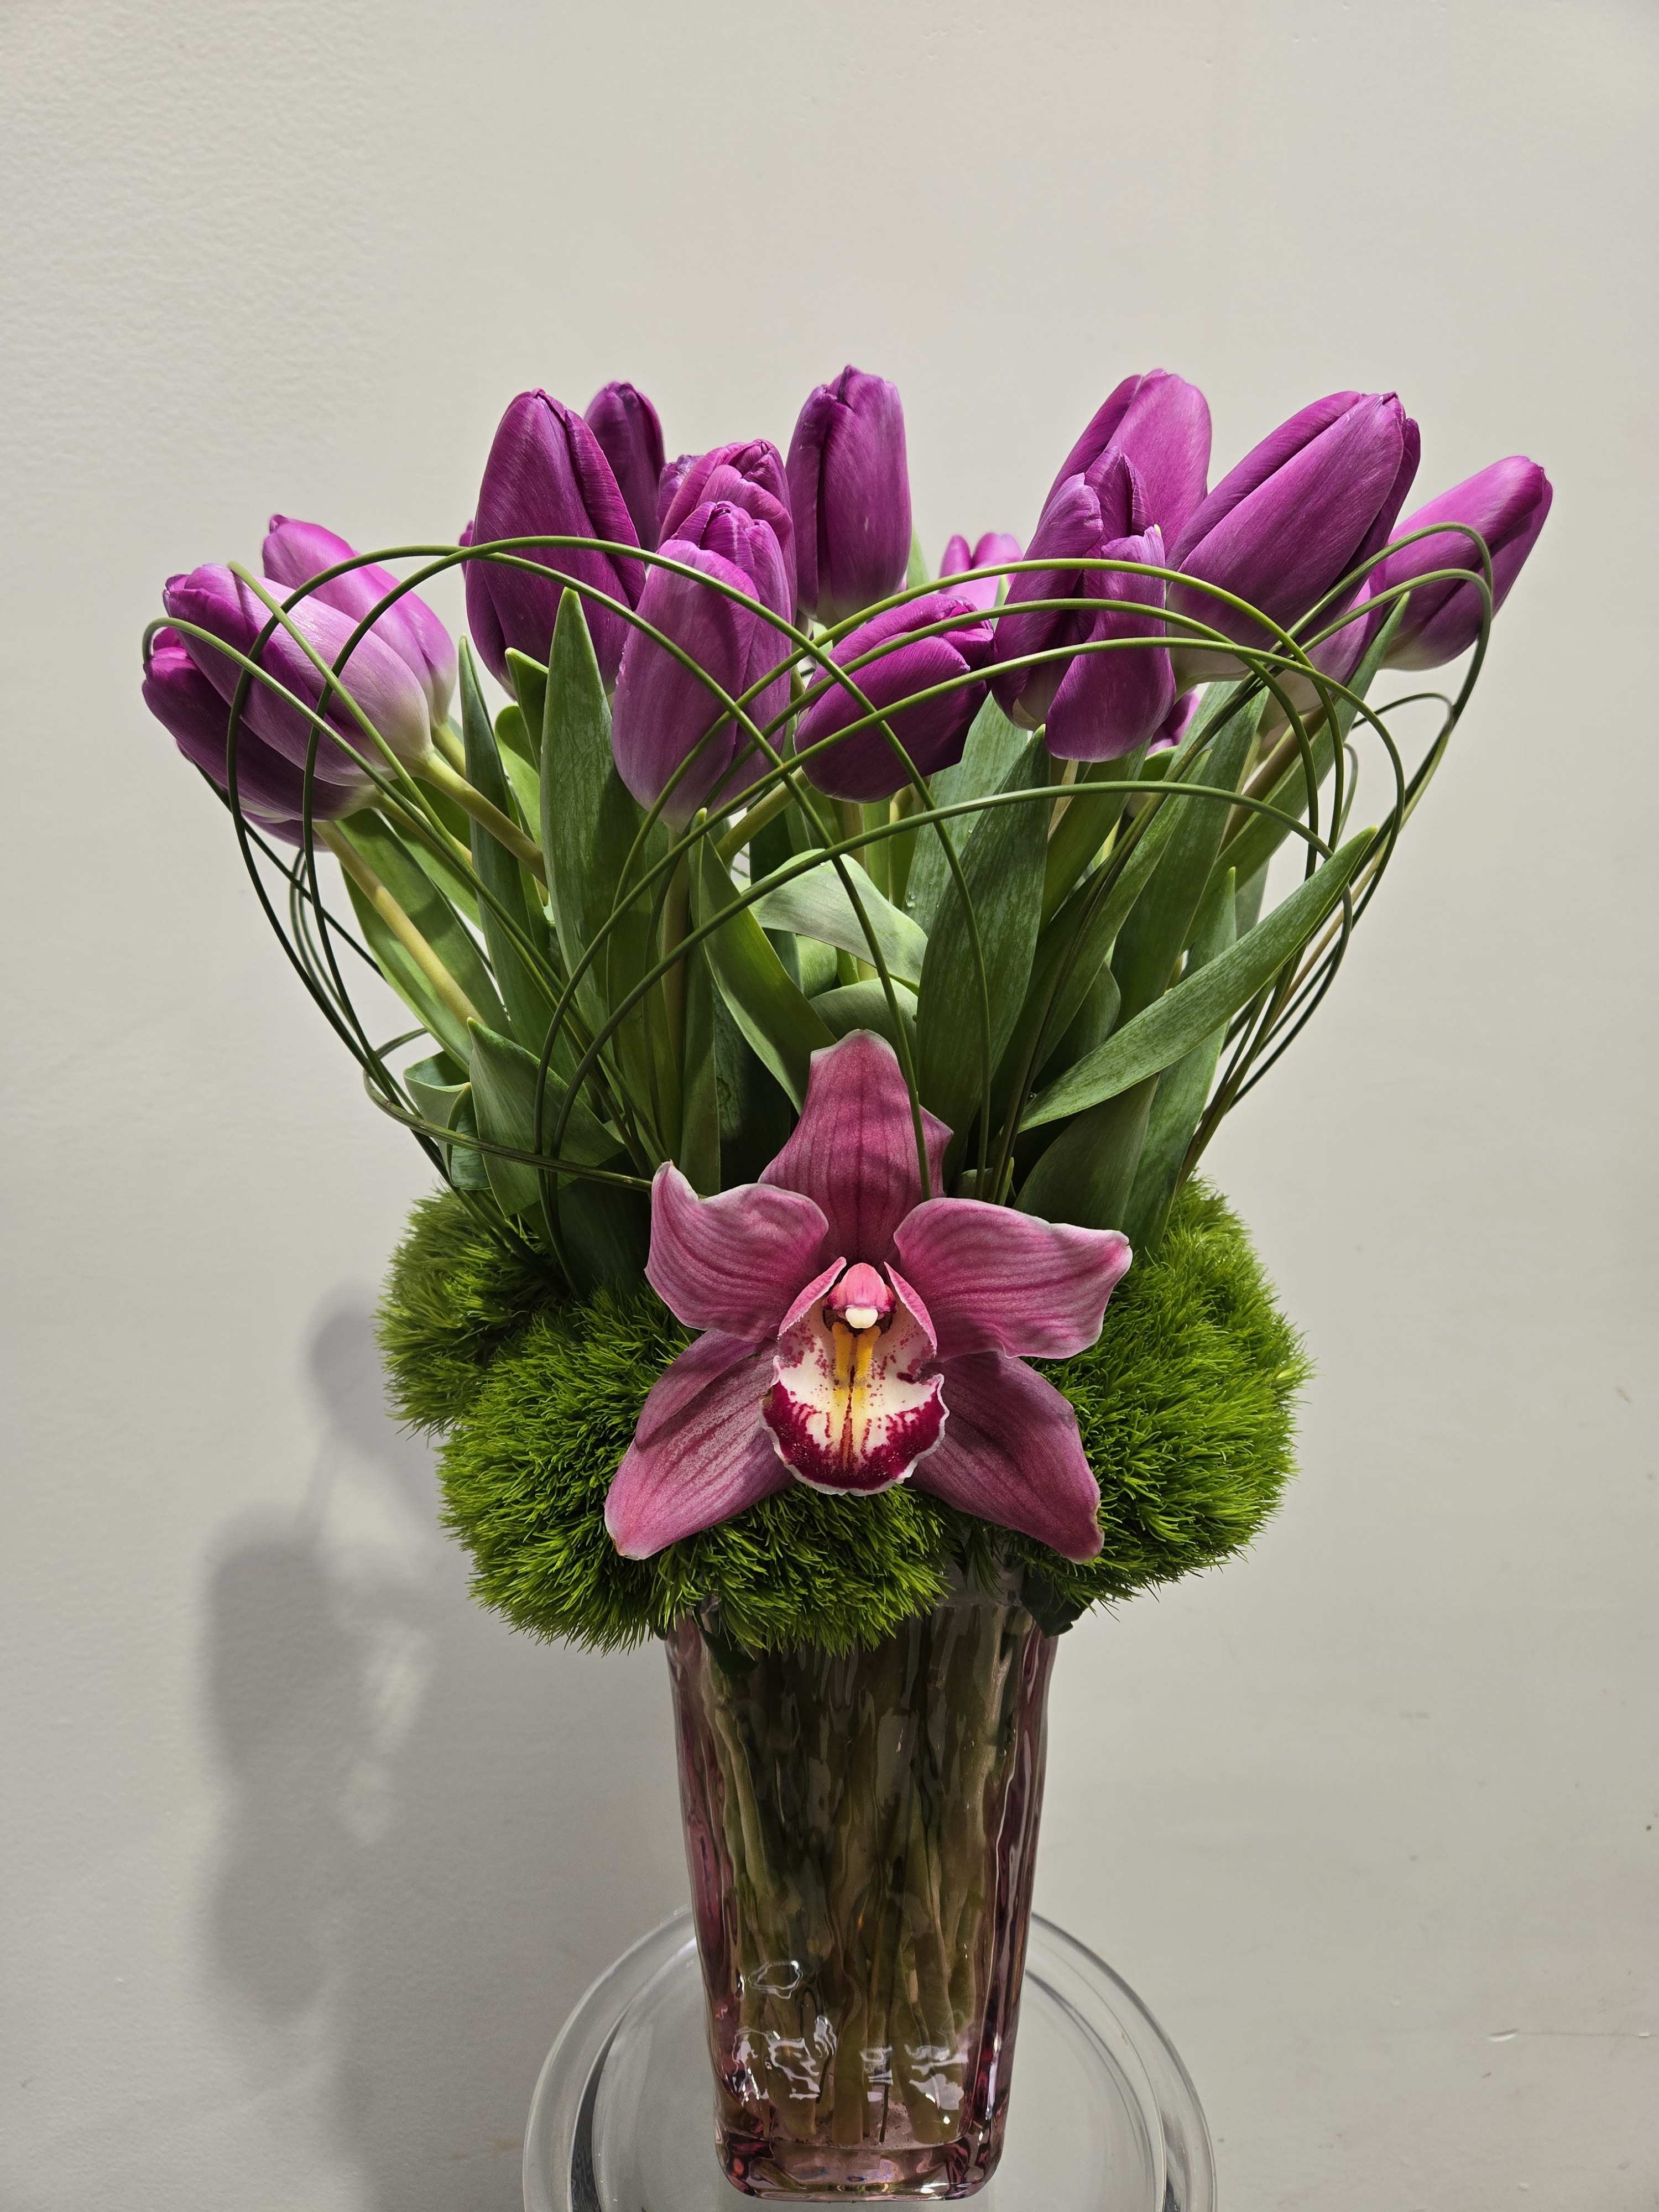 Lovely Purple Tulips - 30 purple tulips nicely displayed in a pink glass vase with grass loops and cymbidium orchid.